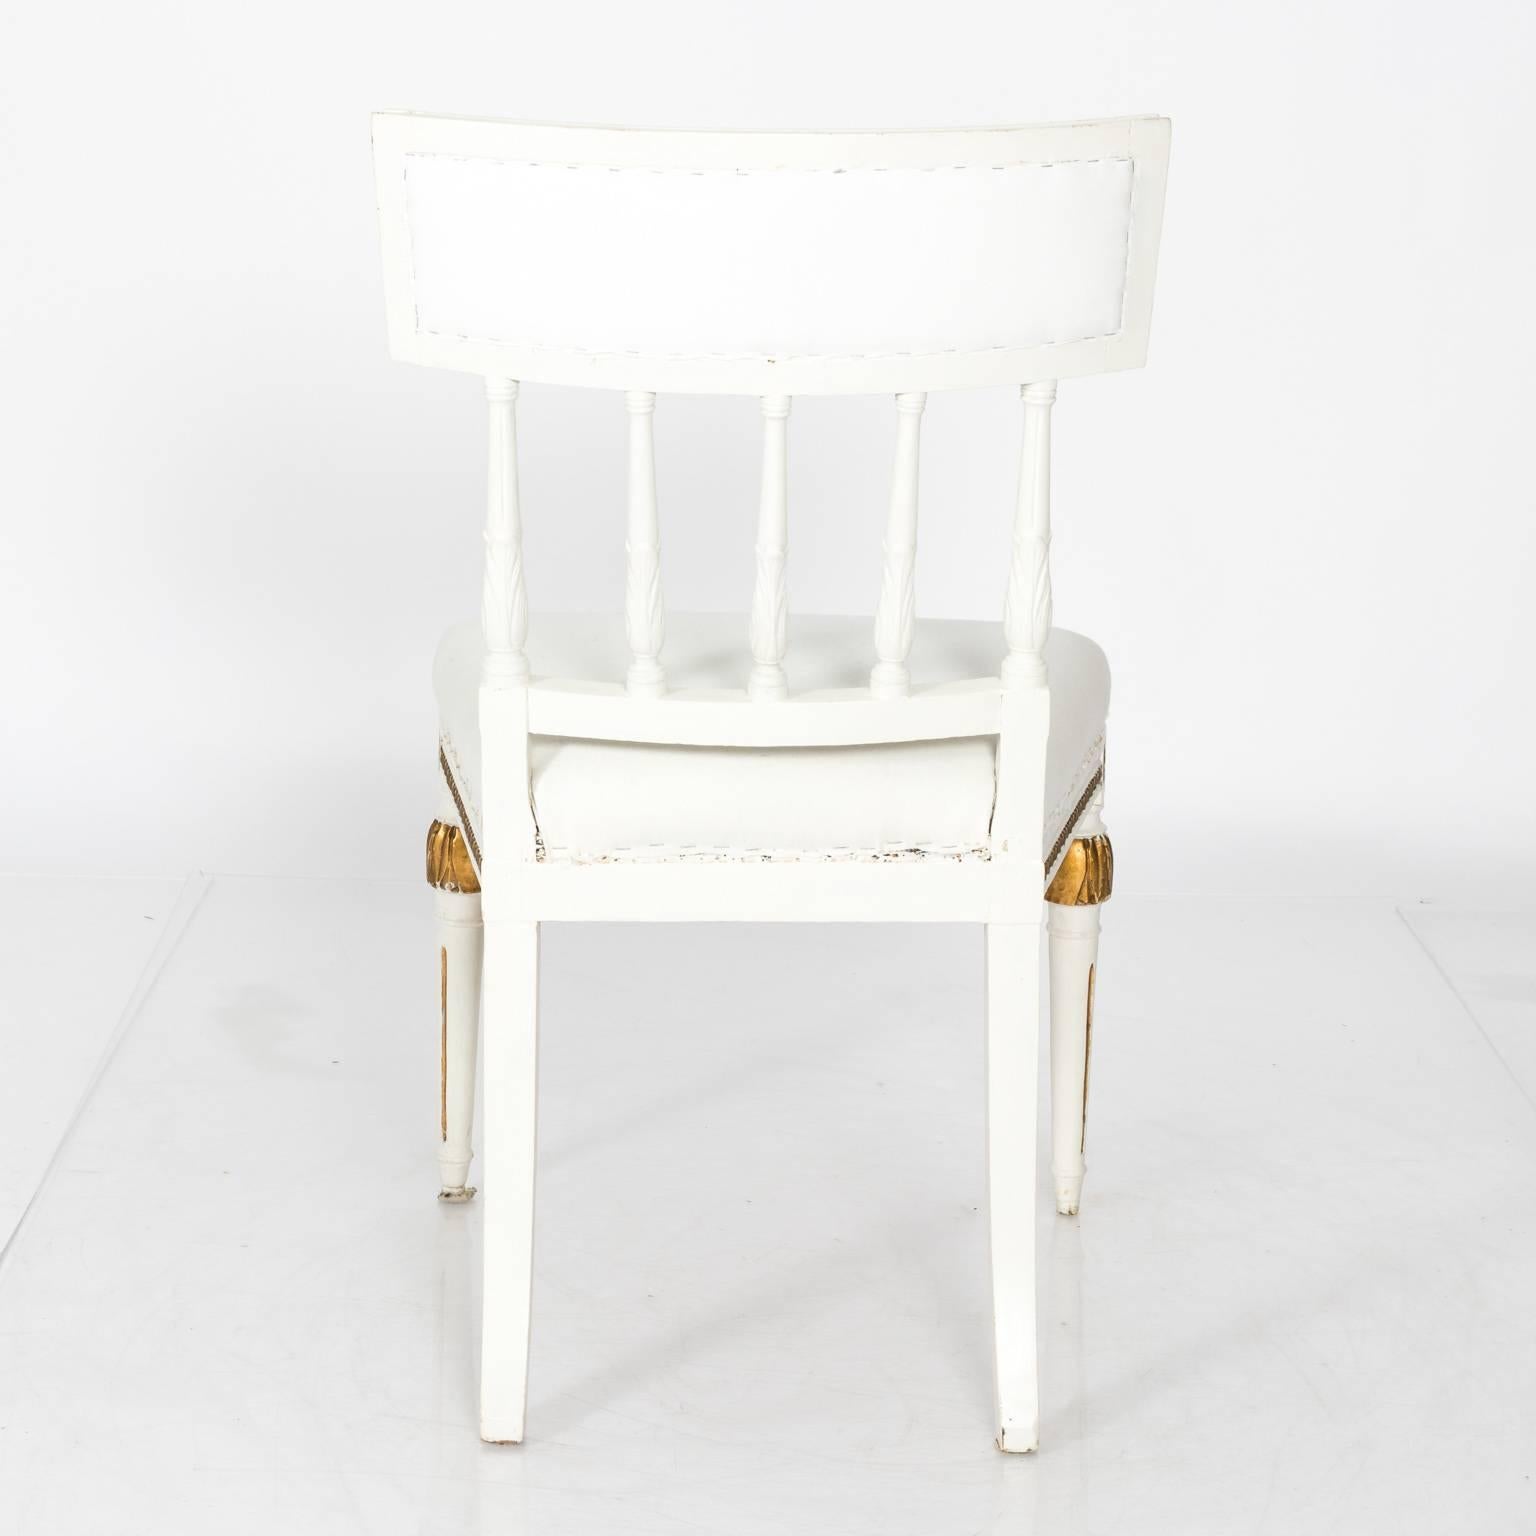 A pair of white-painted Gustavian chairs with gilt detailing, rosettes, fluted legs, circa 1800s.